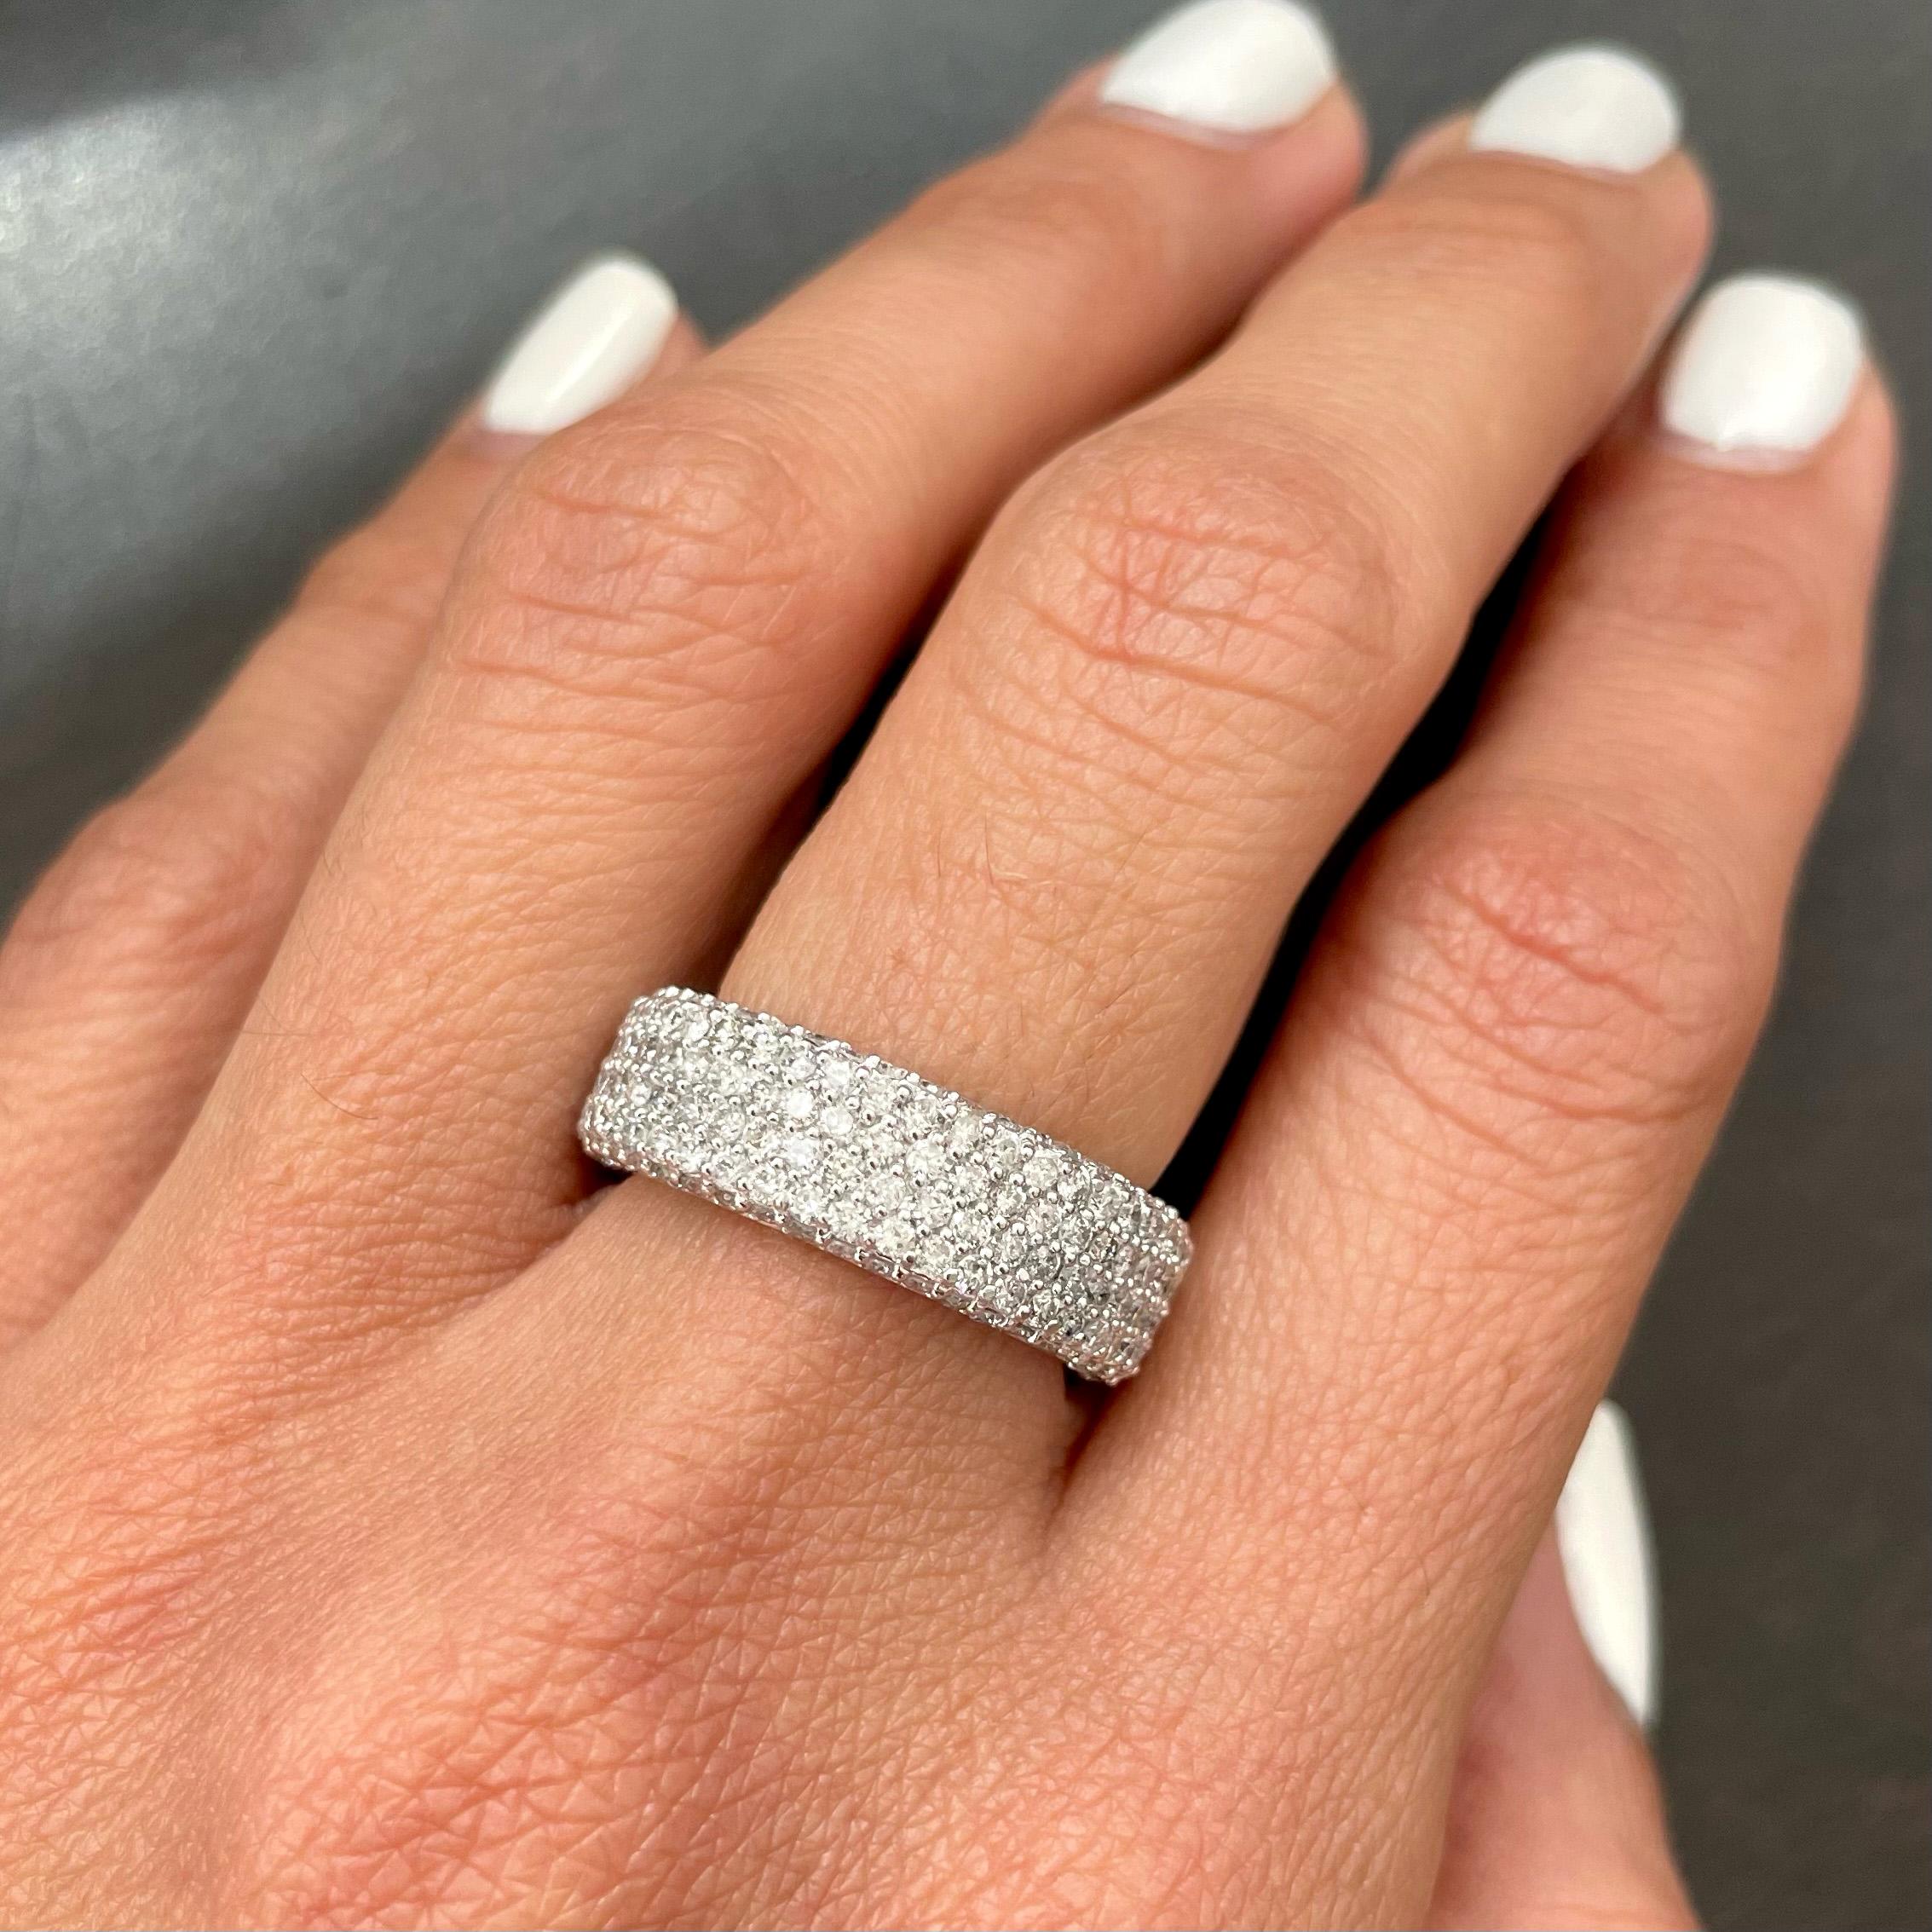 This beautiful diamond eternity band features pave set diamonds in a polished finish. The ring is made of 14k white gold and set with 3.59 carats (total weight) of brilliant round-cut diamonds, which are G/H color and SI2 clarity. The ring is new